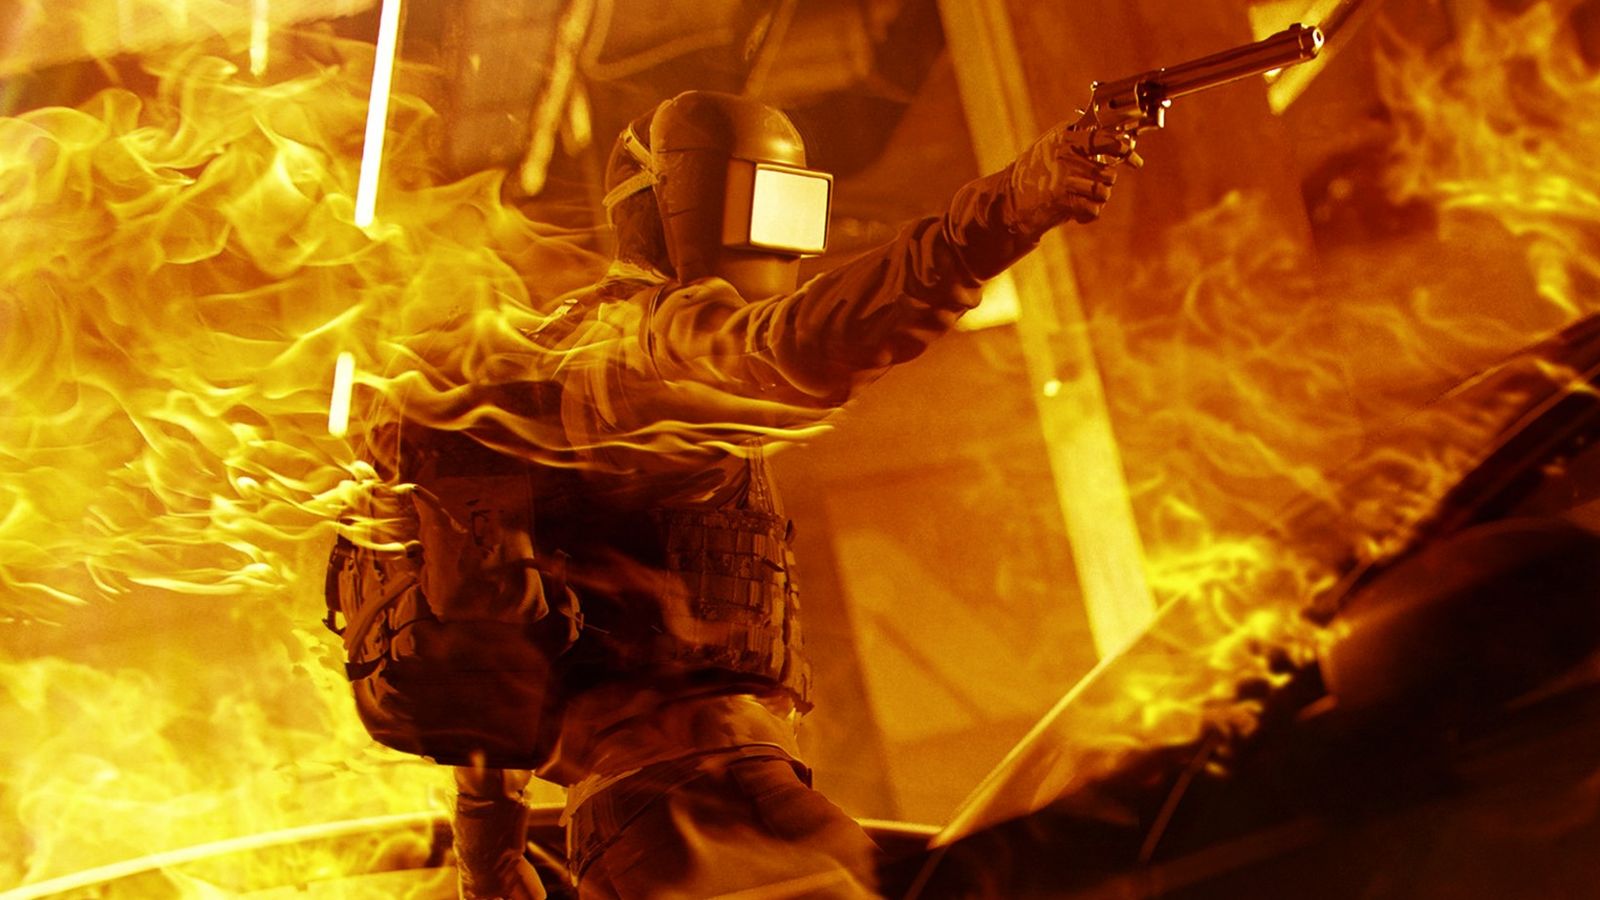 The Finals meta - person in tactical gear, engulfed in flames, holding out a revolver in their right hand.